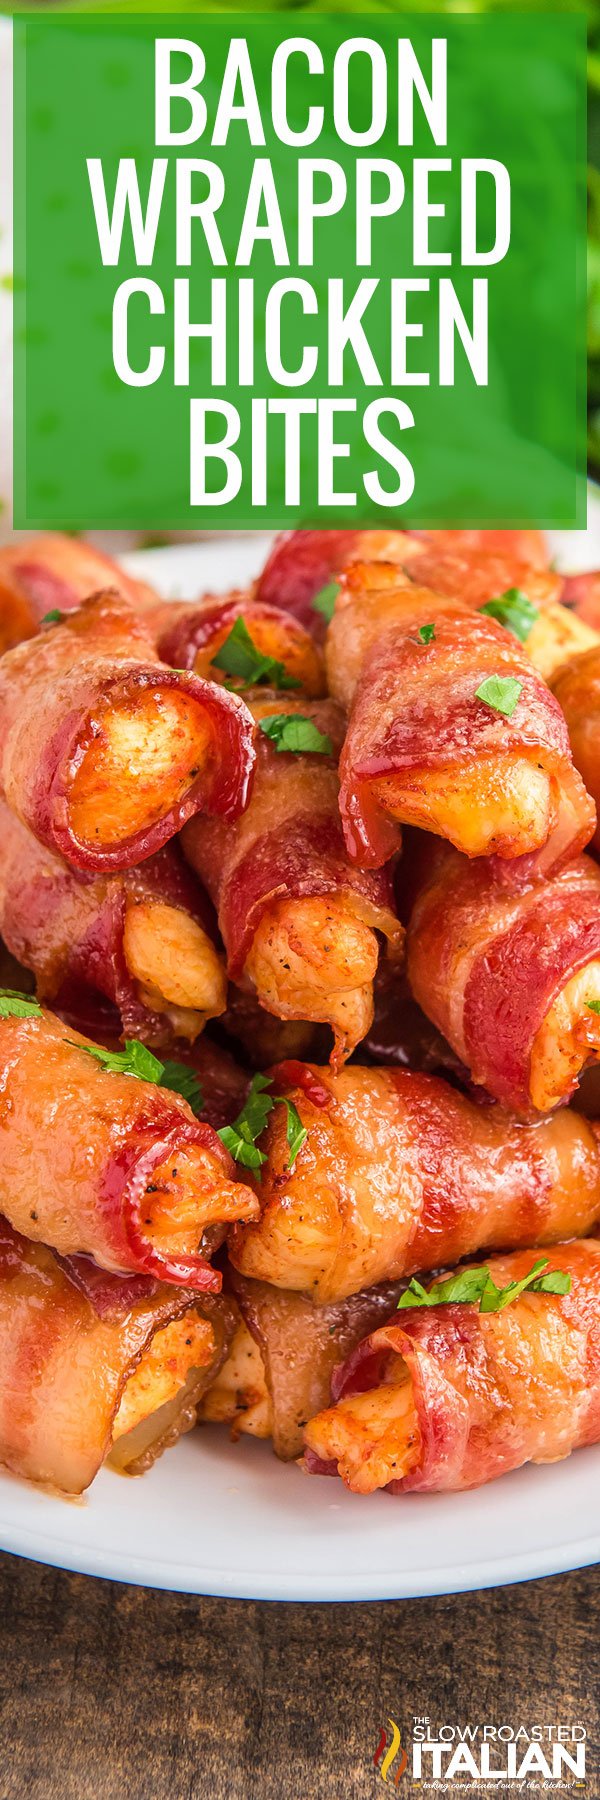 Bacon Wrapped Chicken Bites -PIN